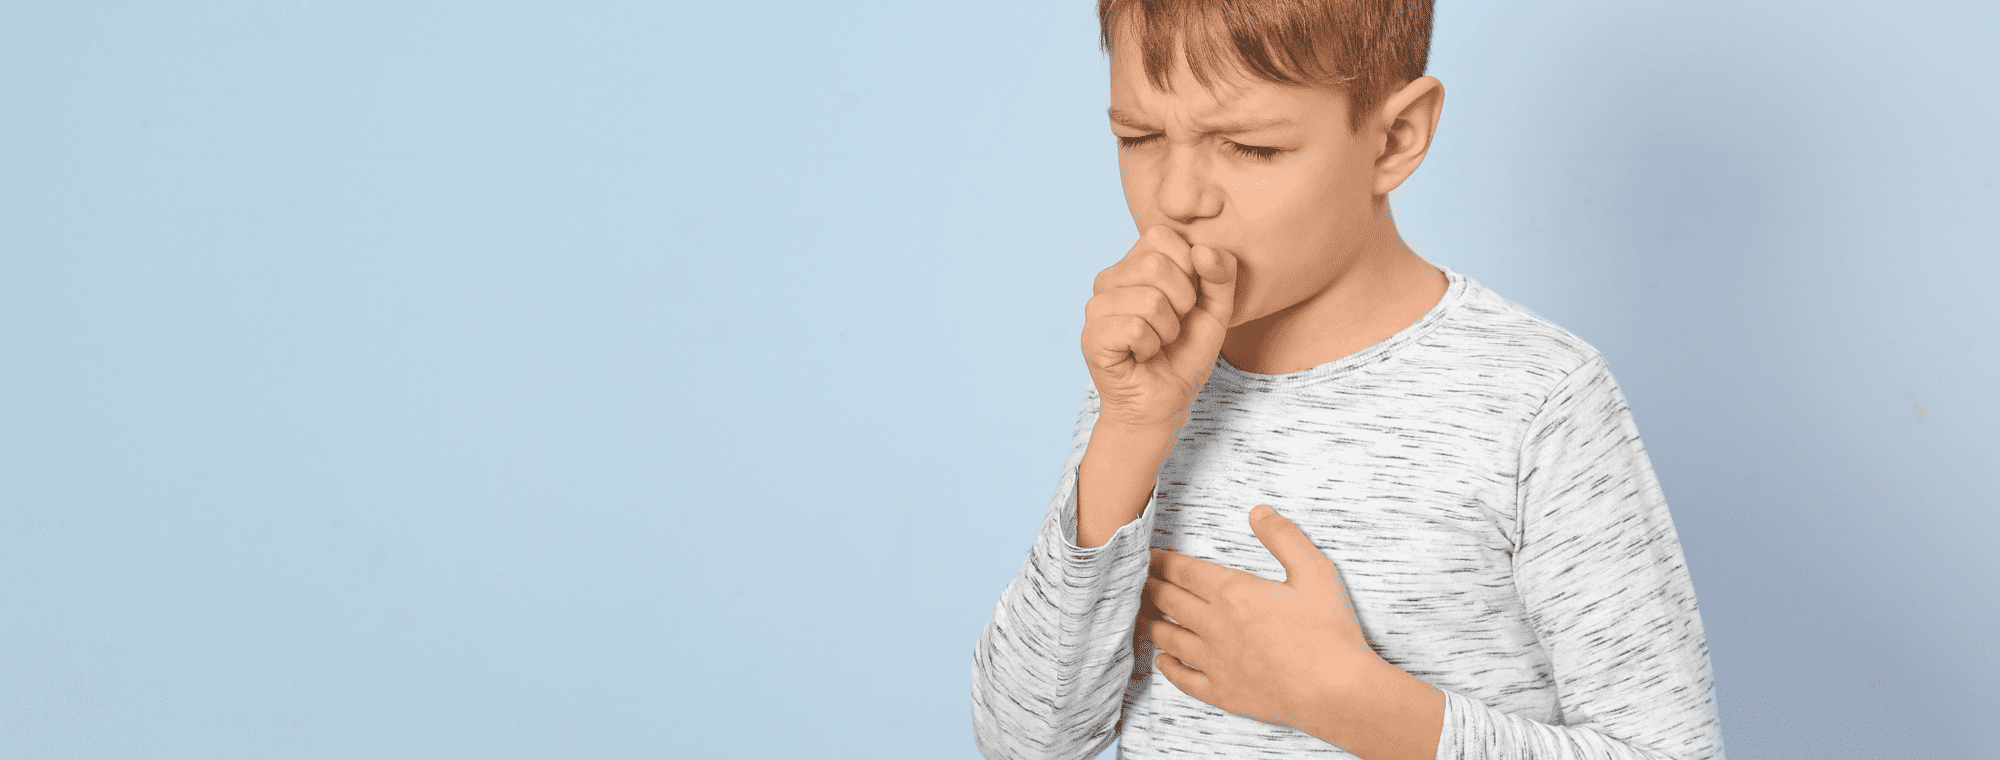 The Difference Between a Normal Cough and a Chronic Cough